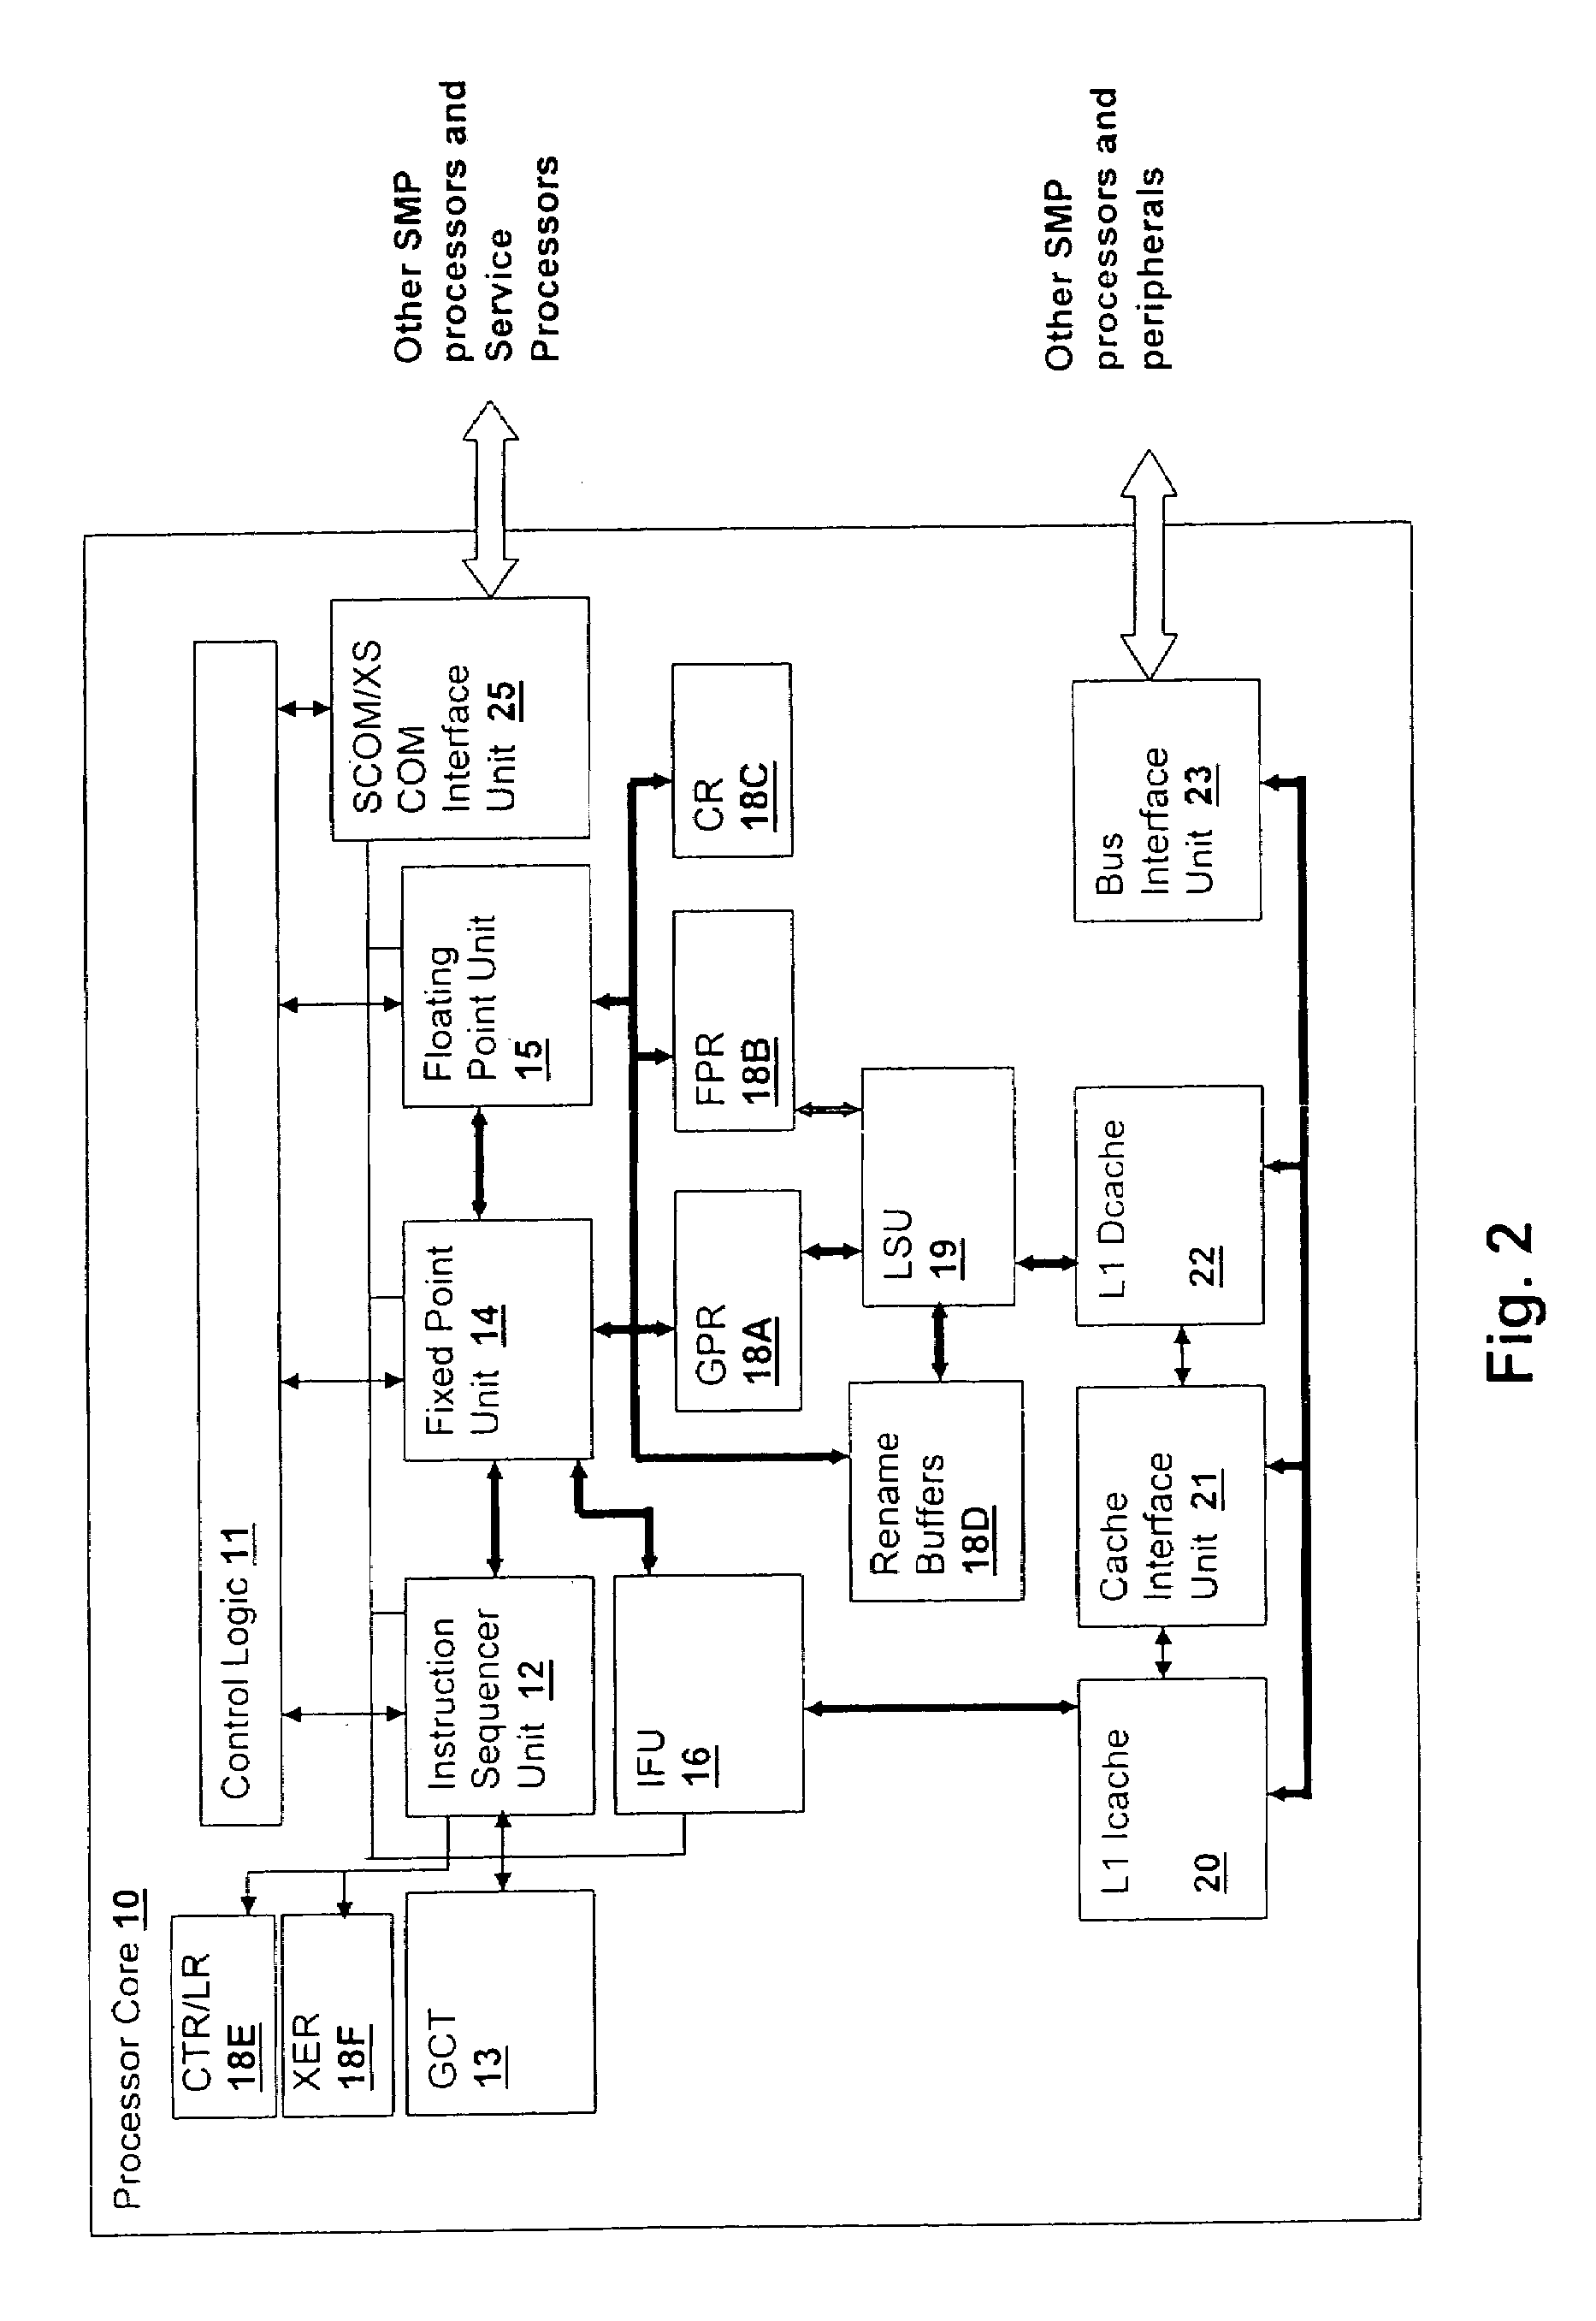 Method and logical apparatus for switching between single-threaded and multi-threaded execution states in a simultaneous multi-threaded (SMT) processor